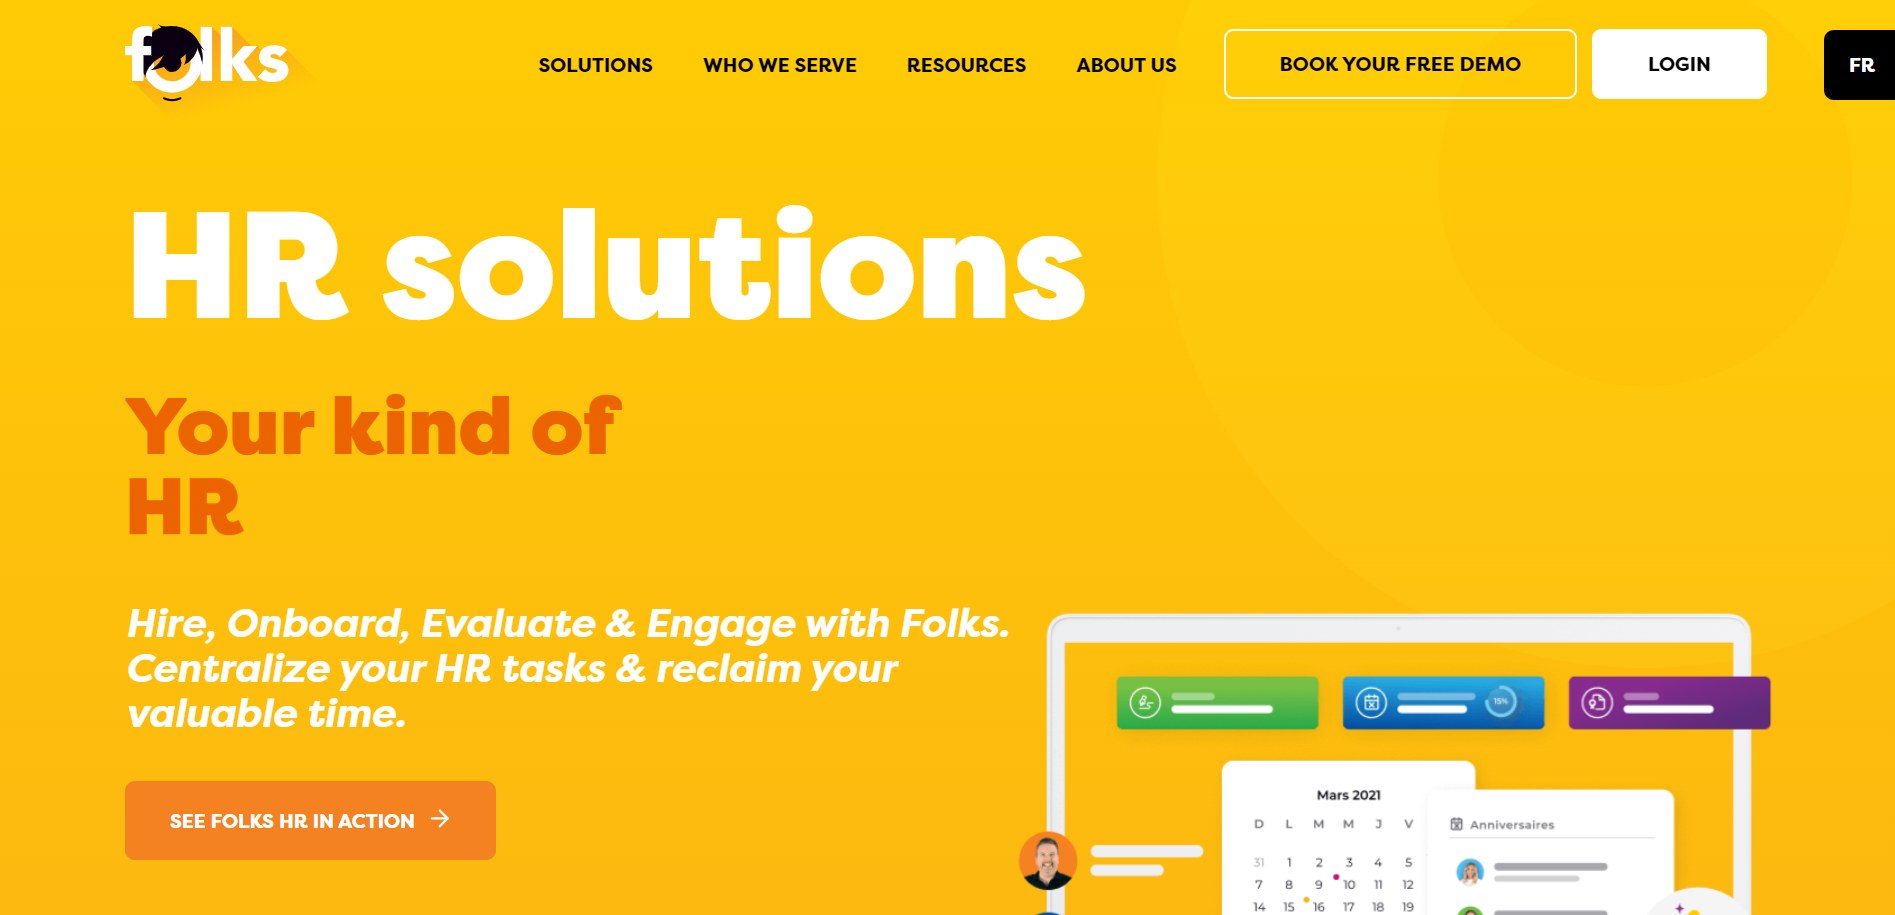 Homepage of Folks website mentioning 'HR solutions your kind of HR'